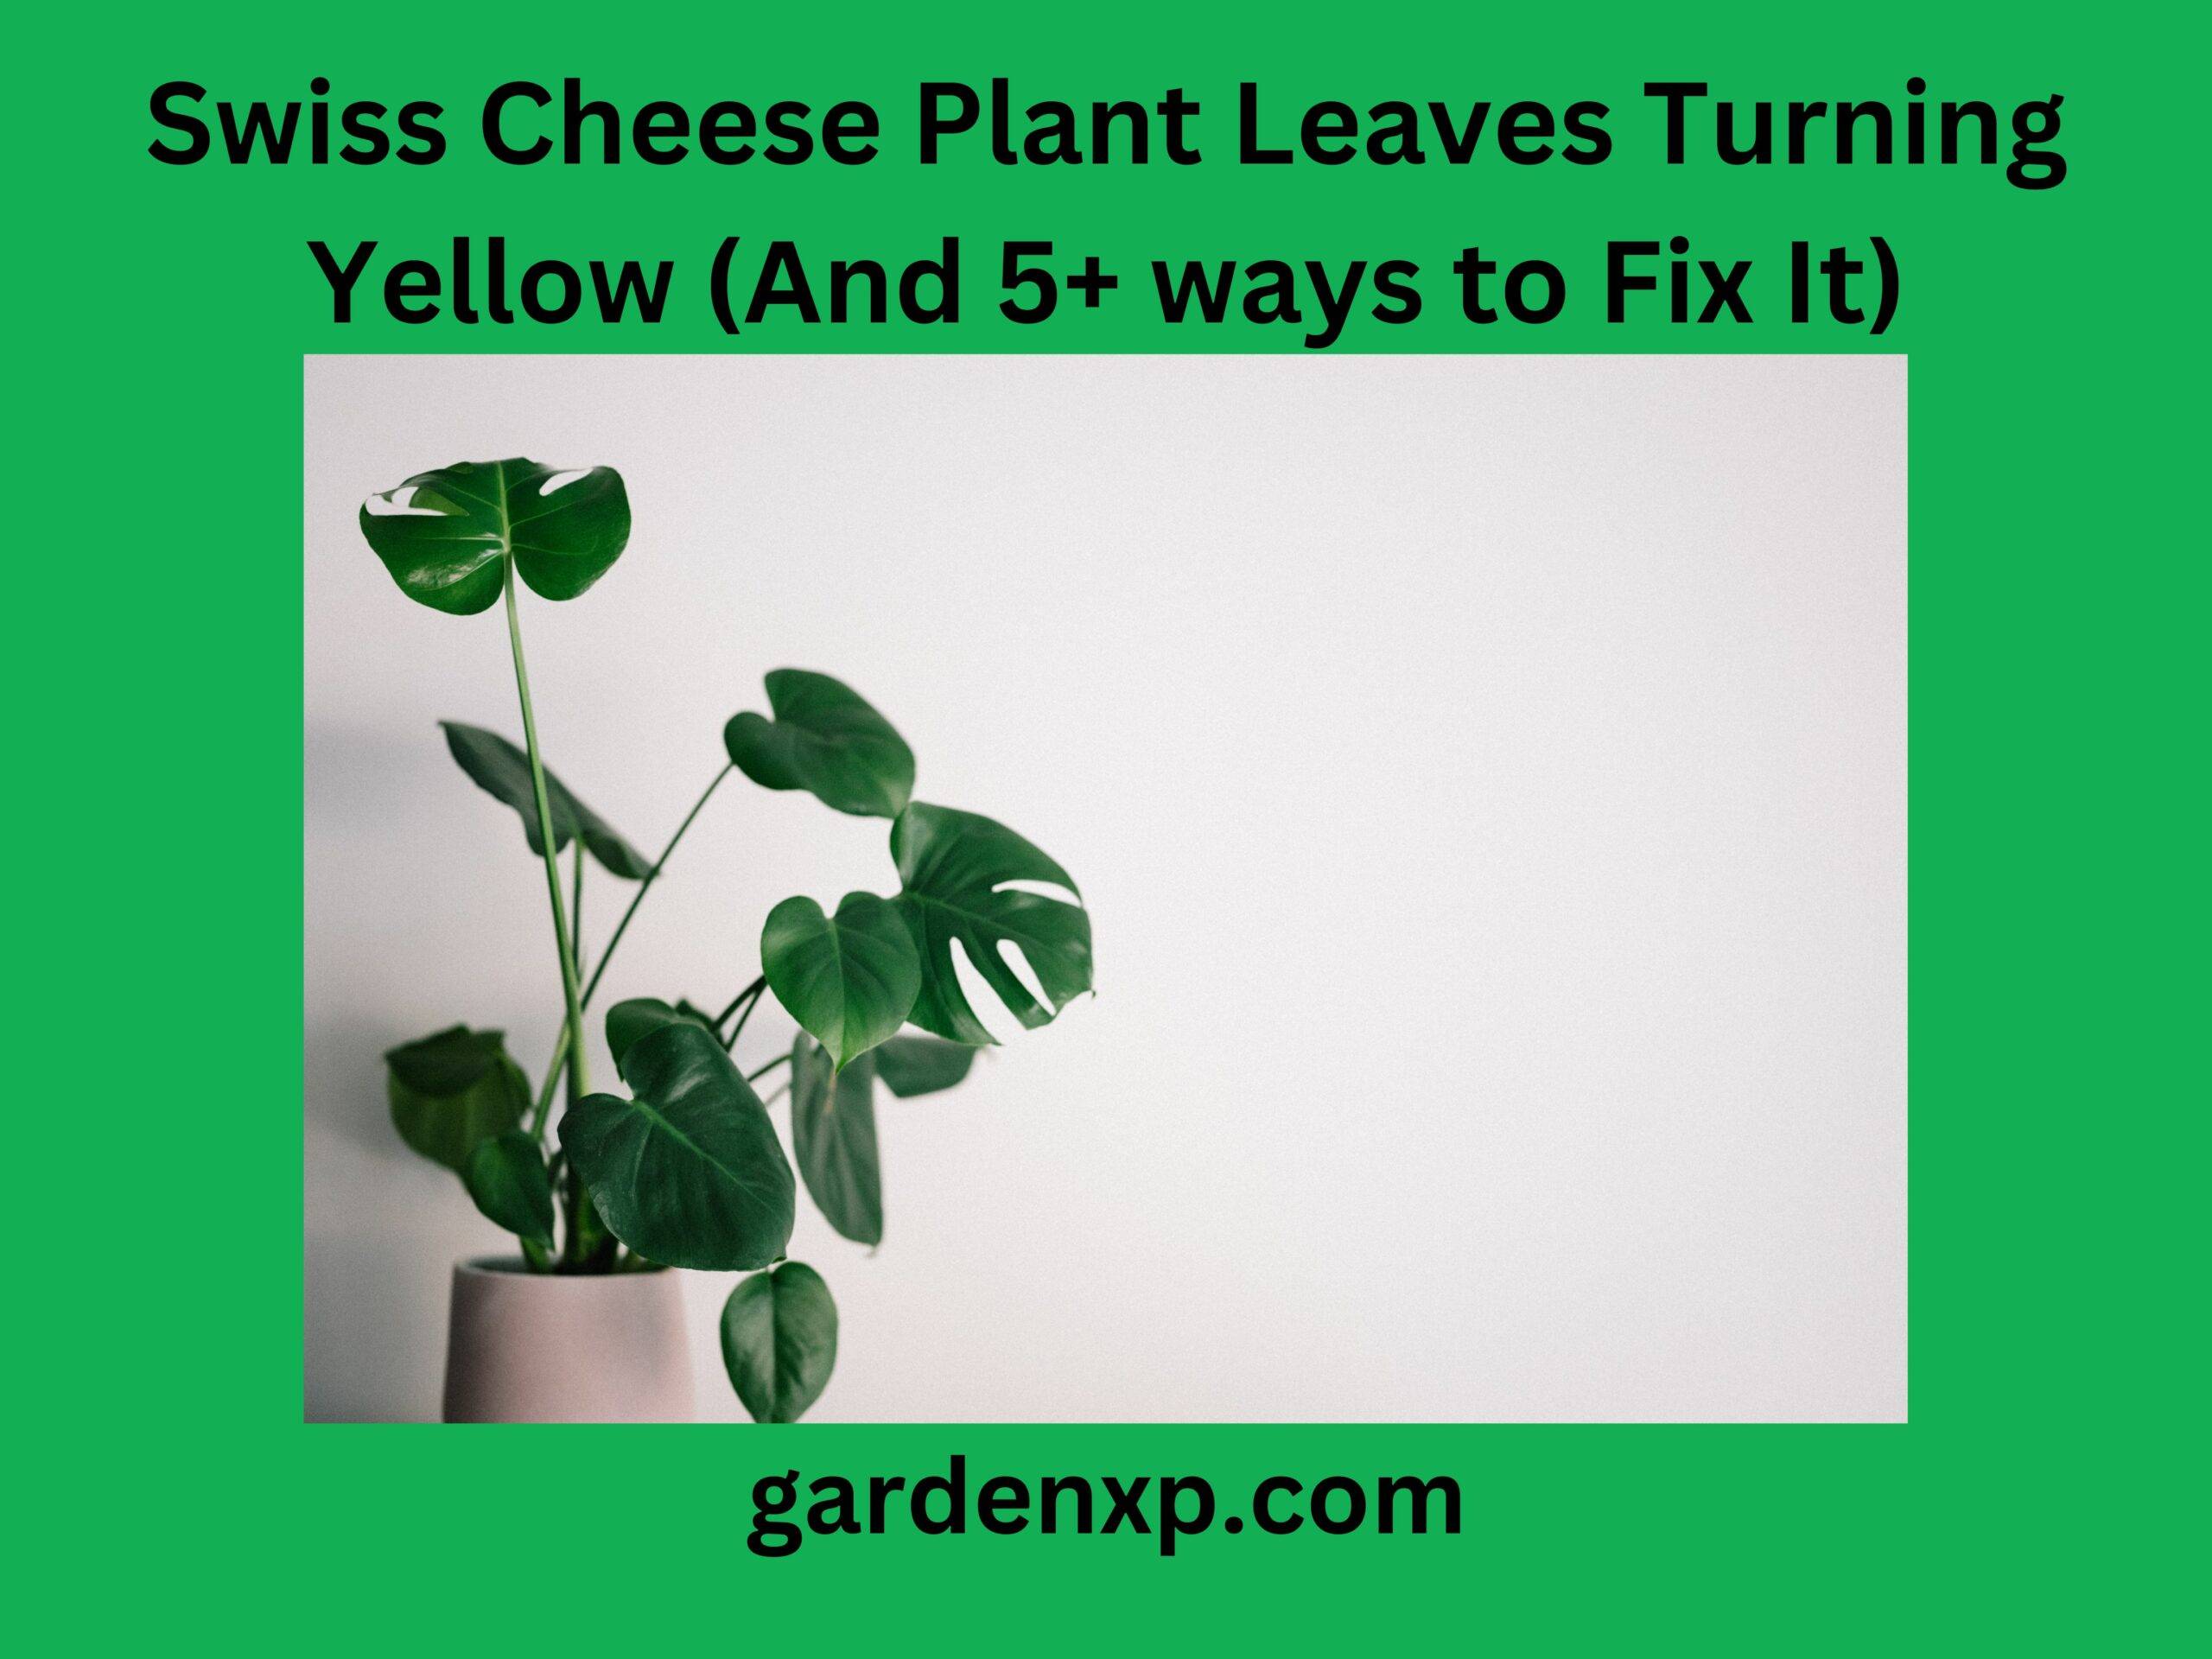 Swiss Cheese Plant Leaves Turning Yellow (And 5+ ways to Fix It)